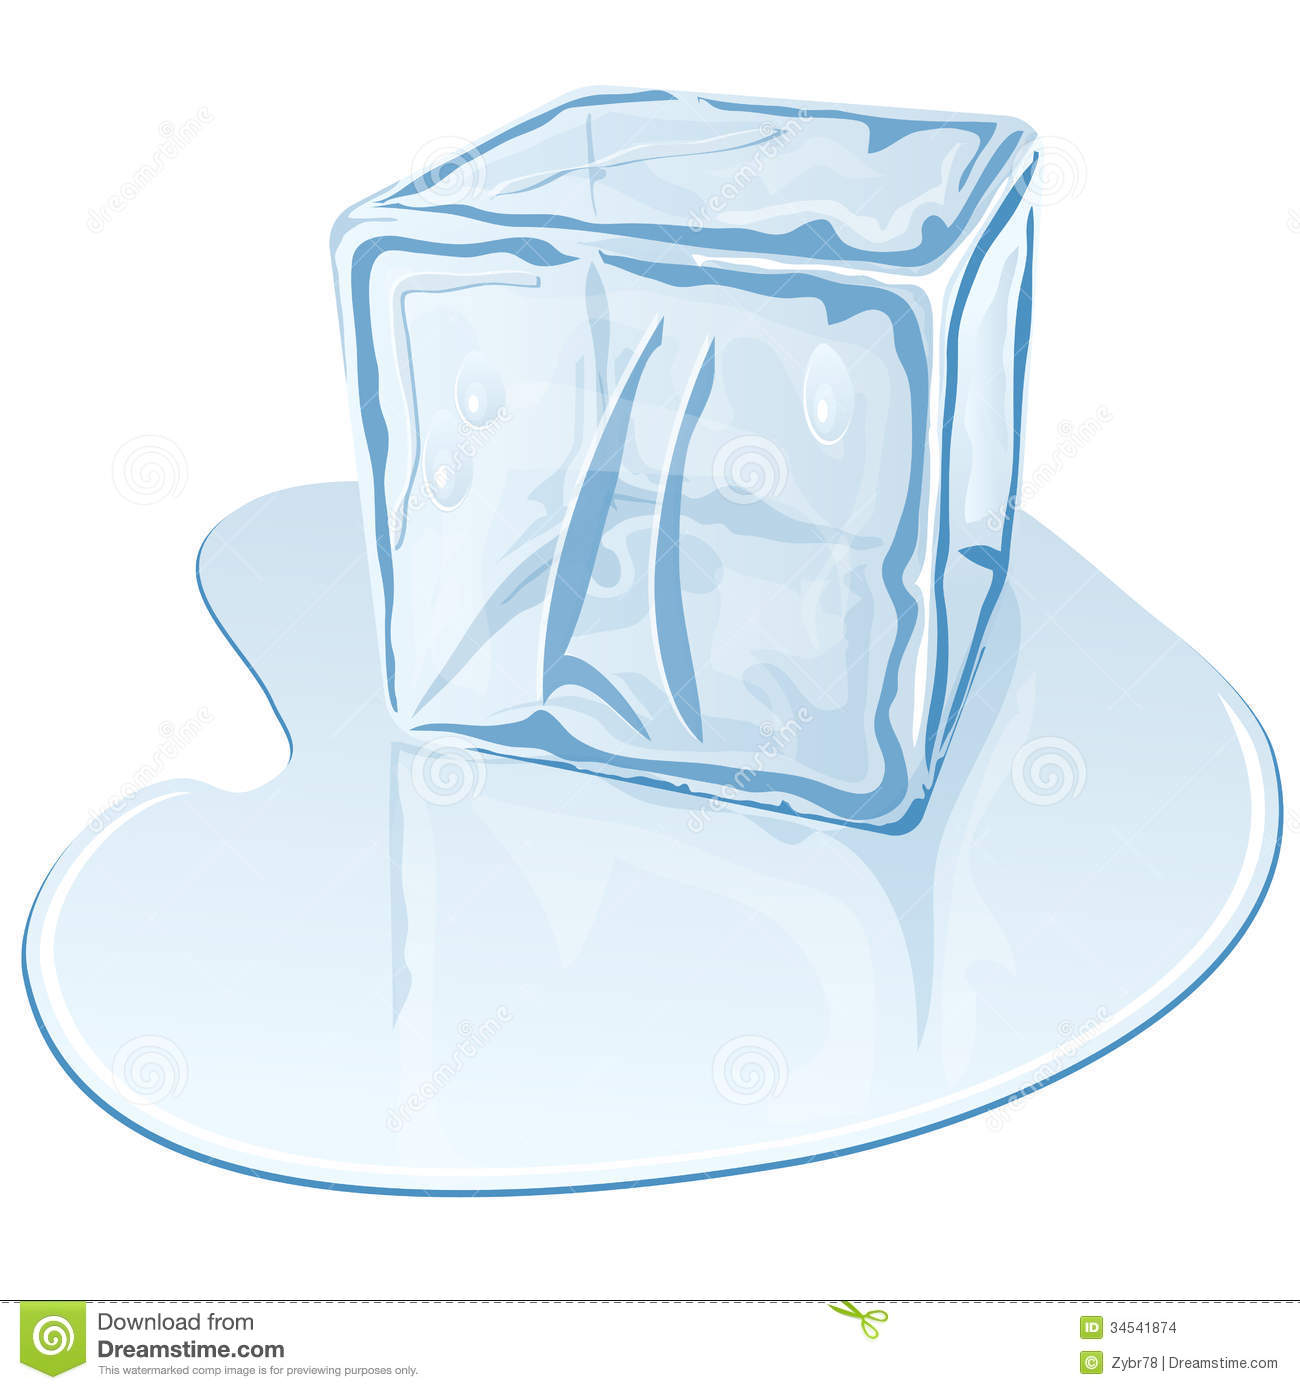 Ice Cube Stock Images   Image  34541874